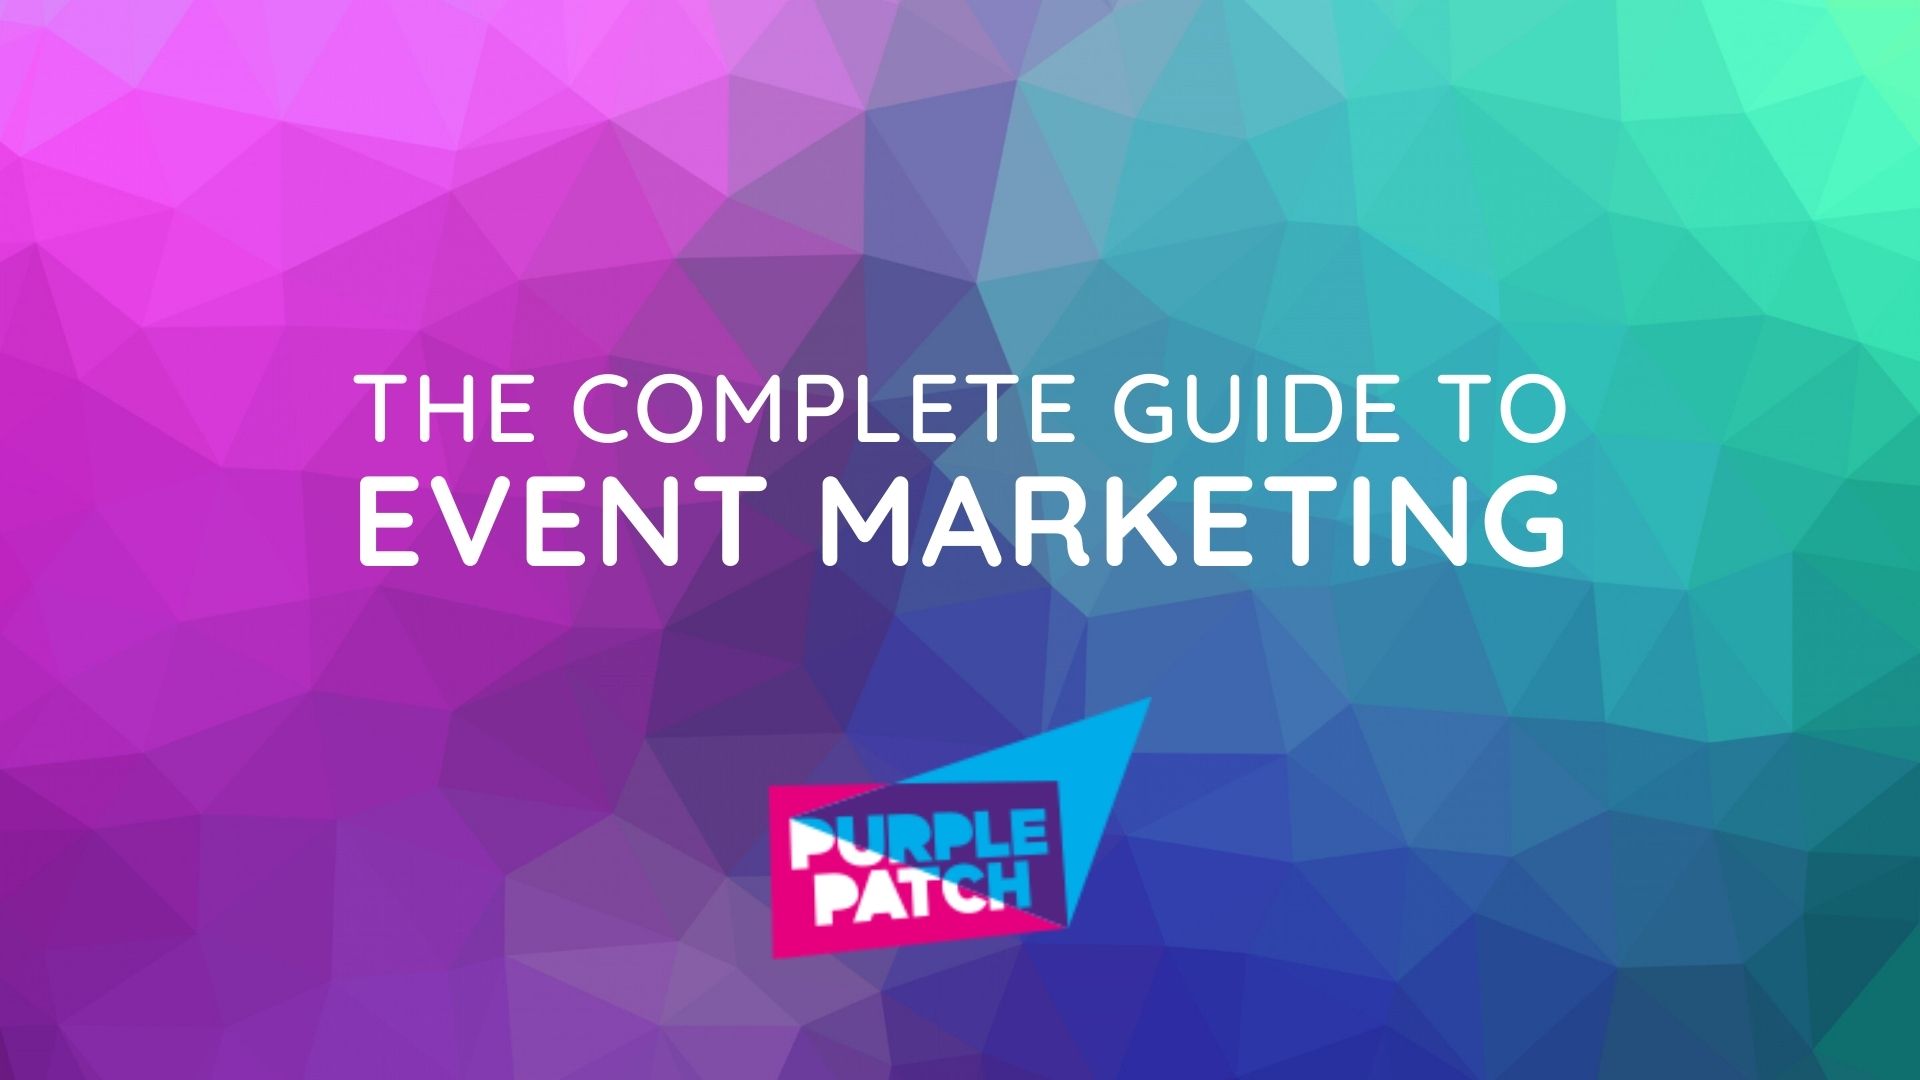 The Complete Guide to Event Marketing